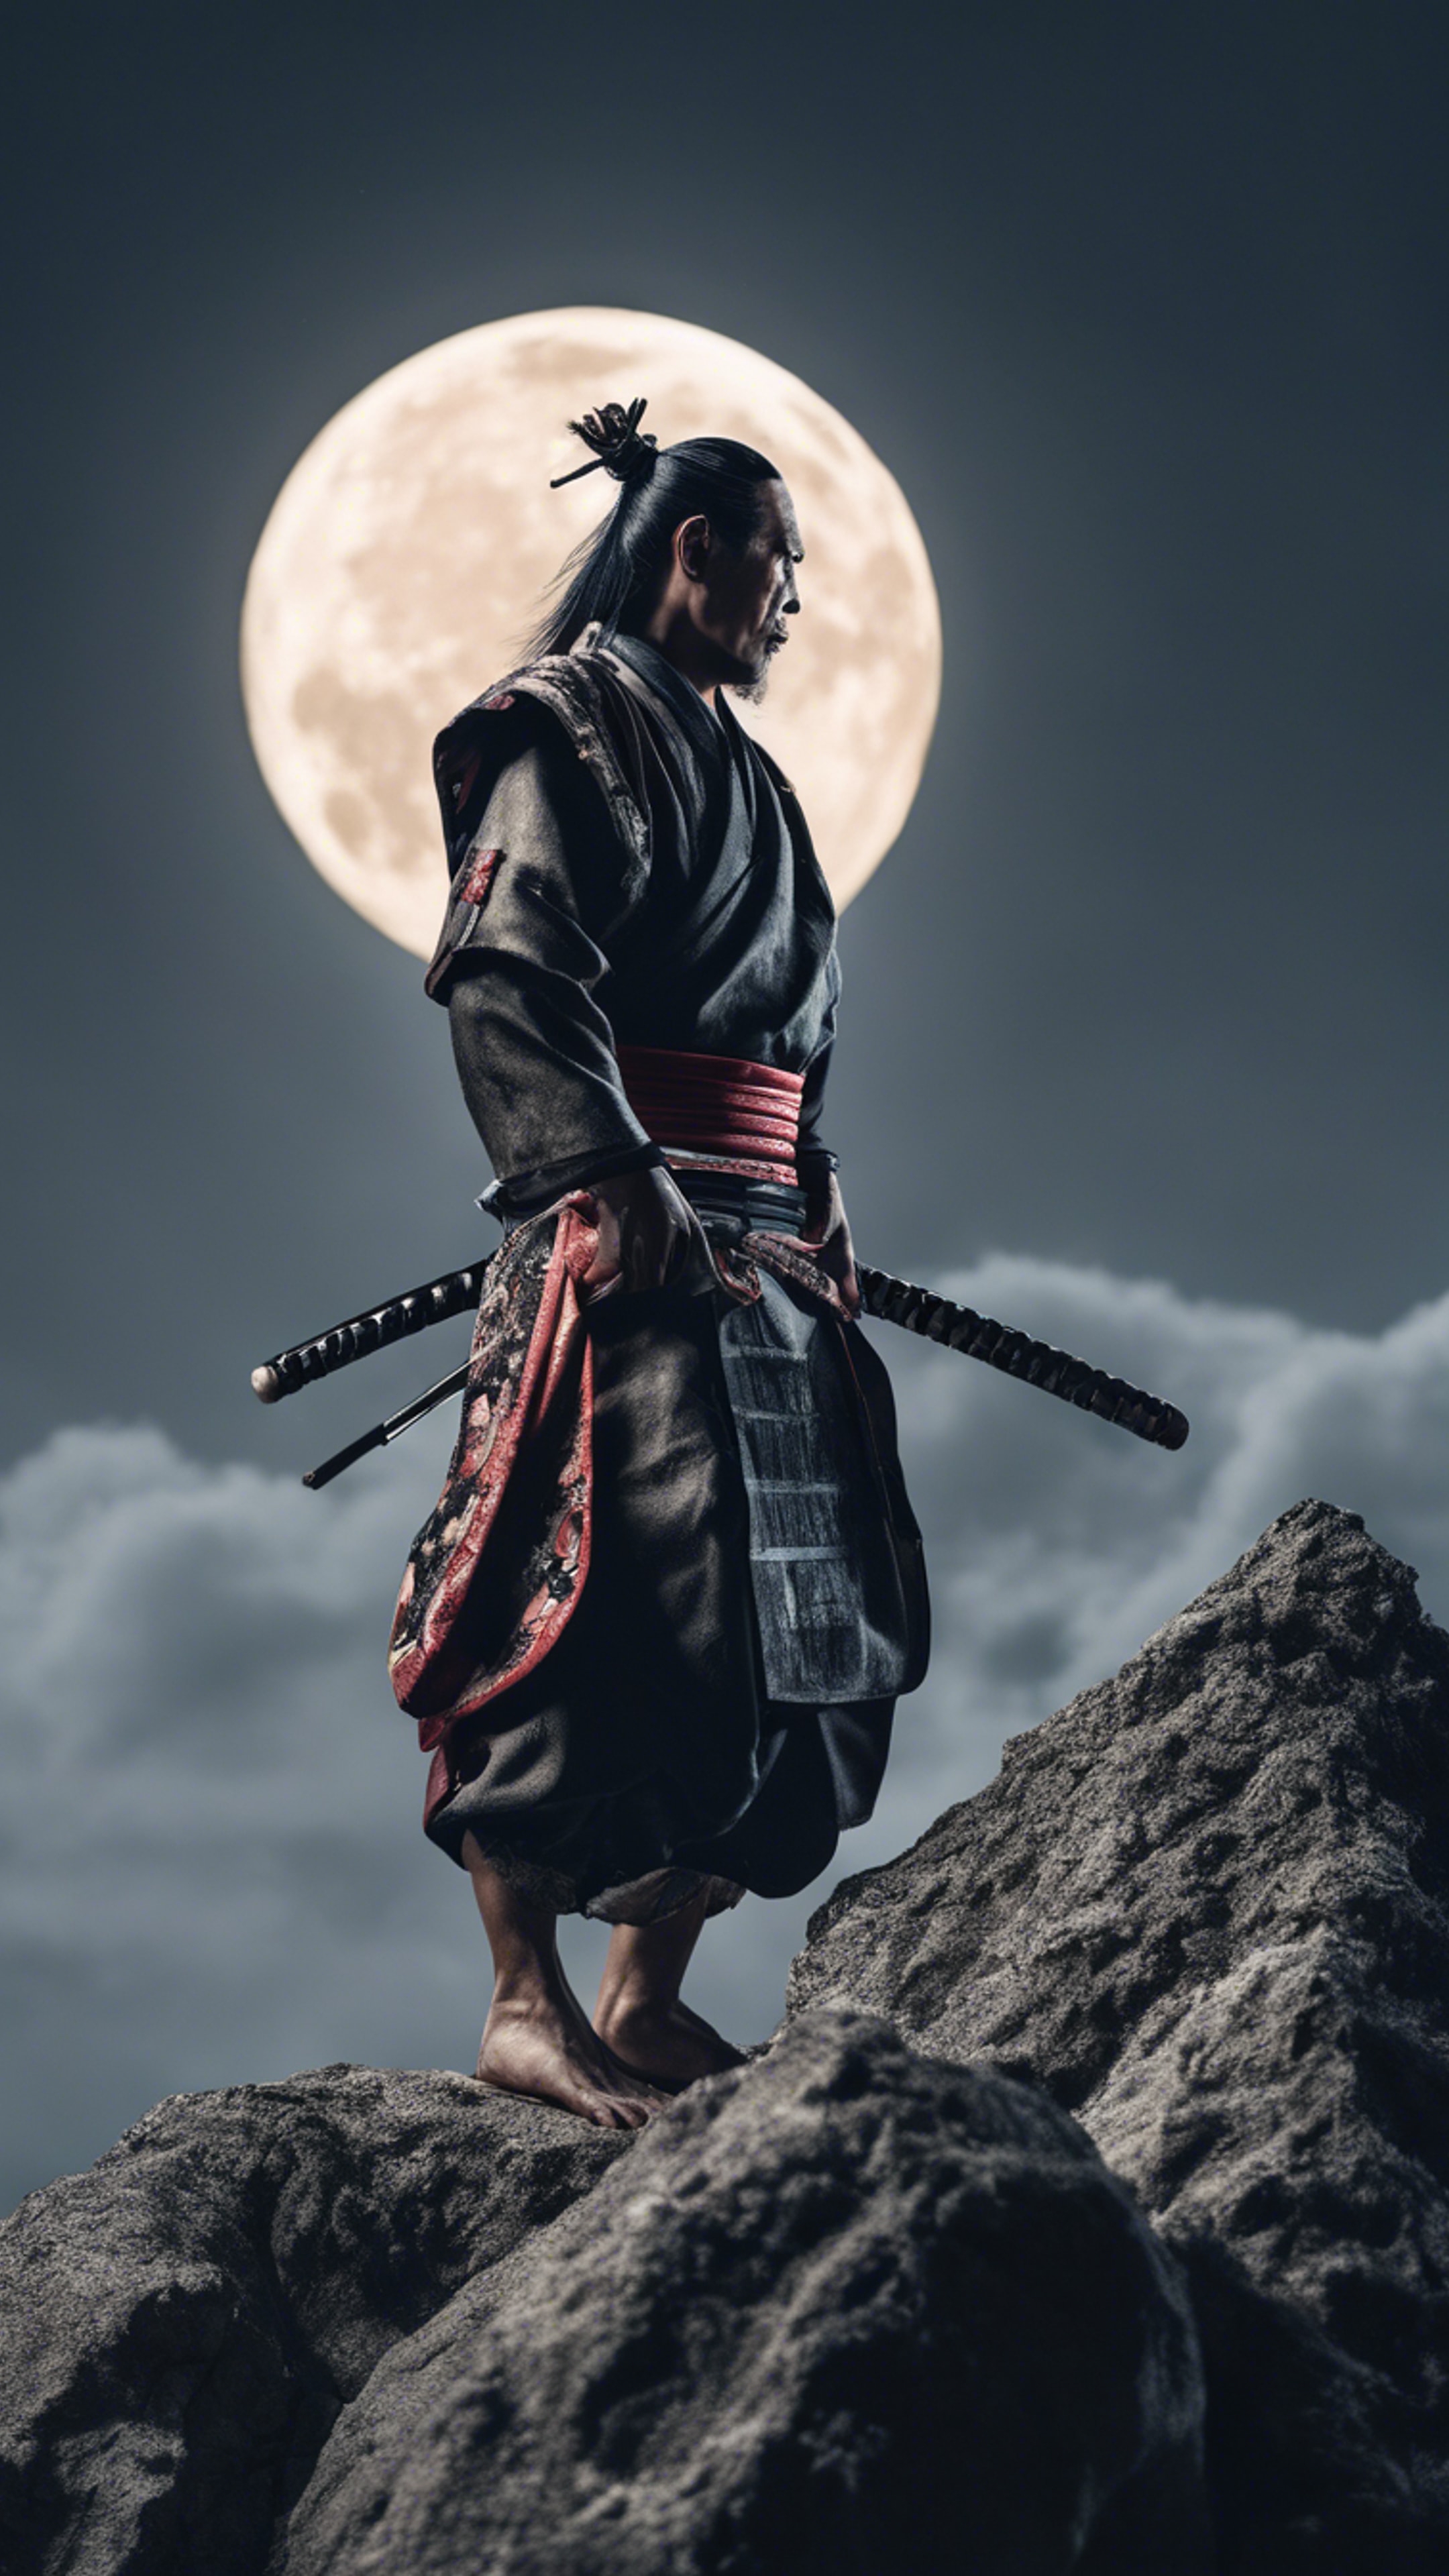 A dignified samurai standing on a rocky cliff under a full moon Wallpaper[853d4aeee7284f1d8df3]